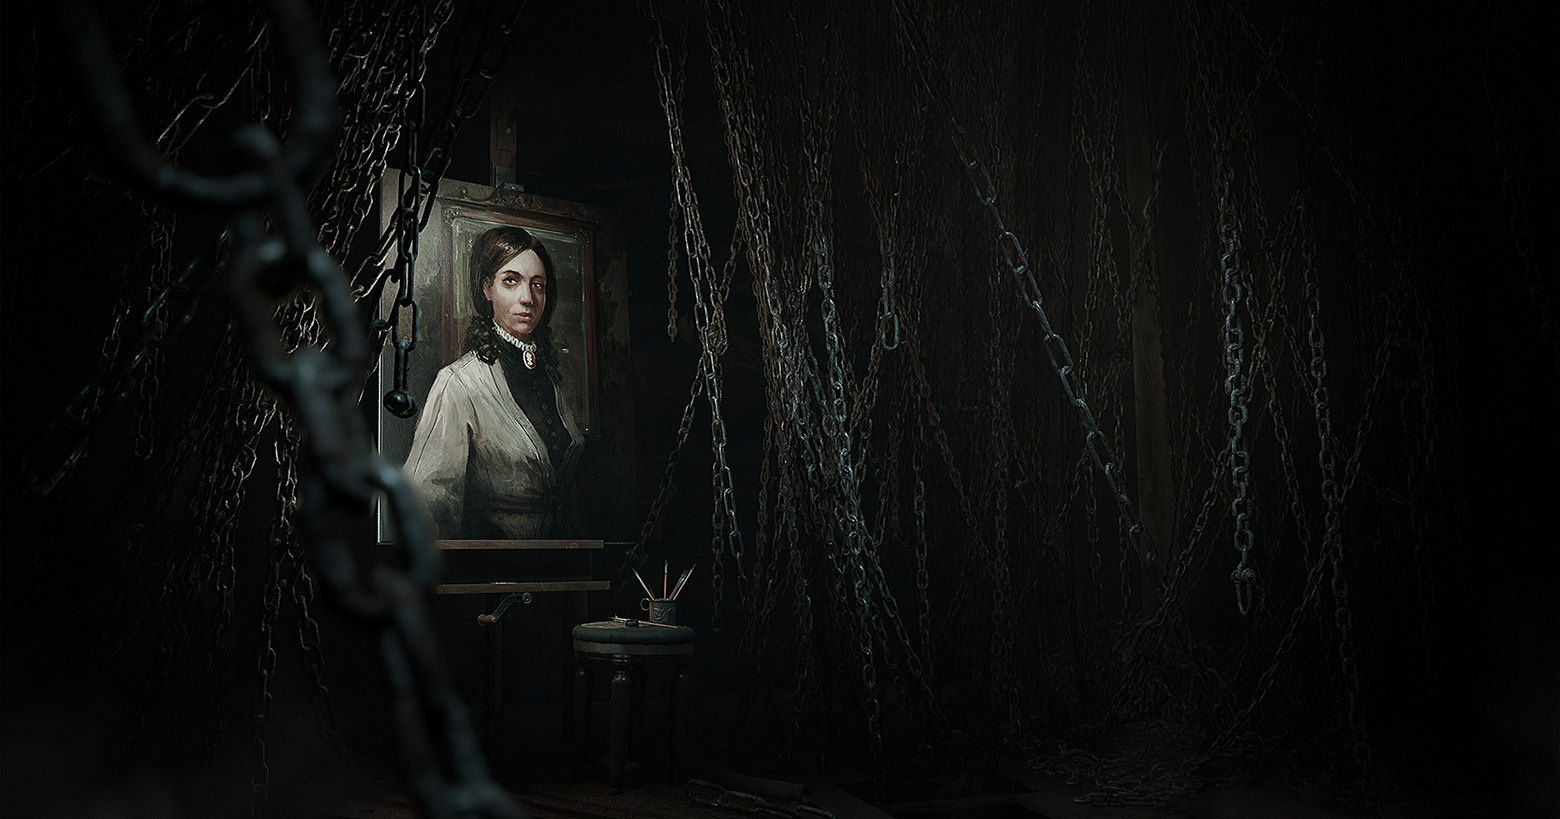 In the third installment of Layers of Fear, you will see creepy oil portraits again. We look at the portrait of a young woman in white clothes.